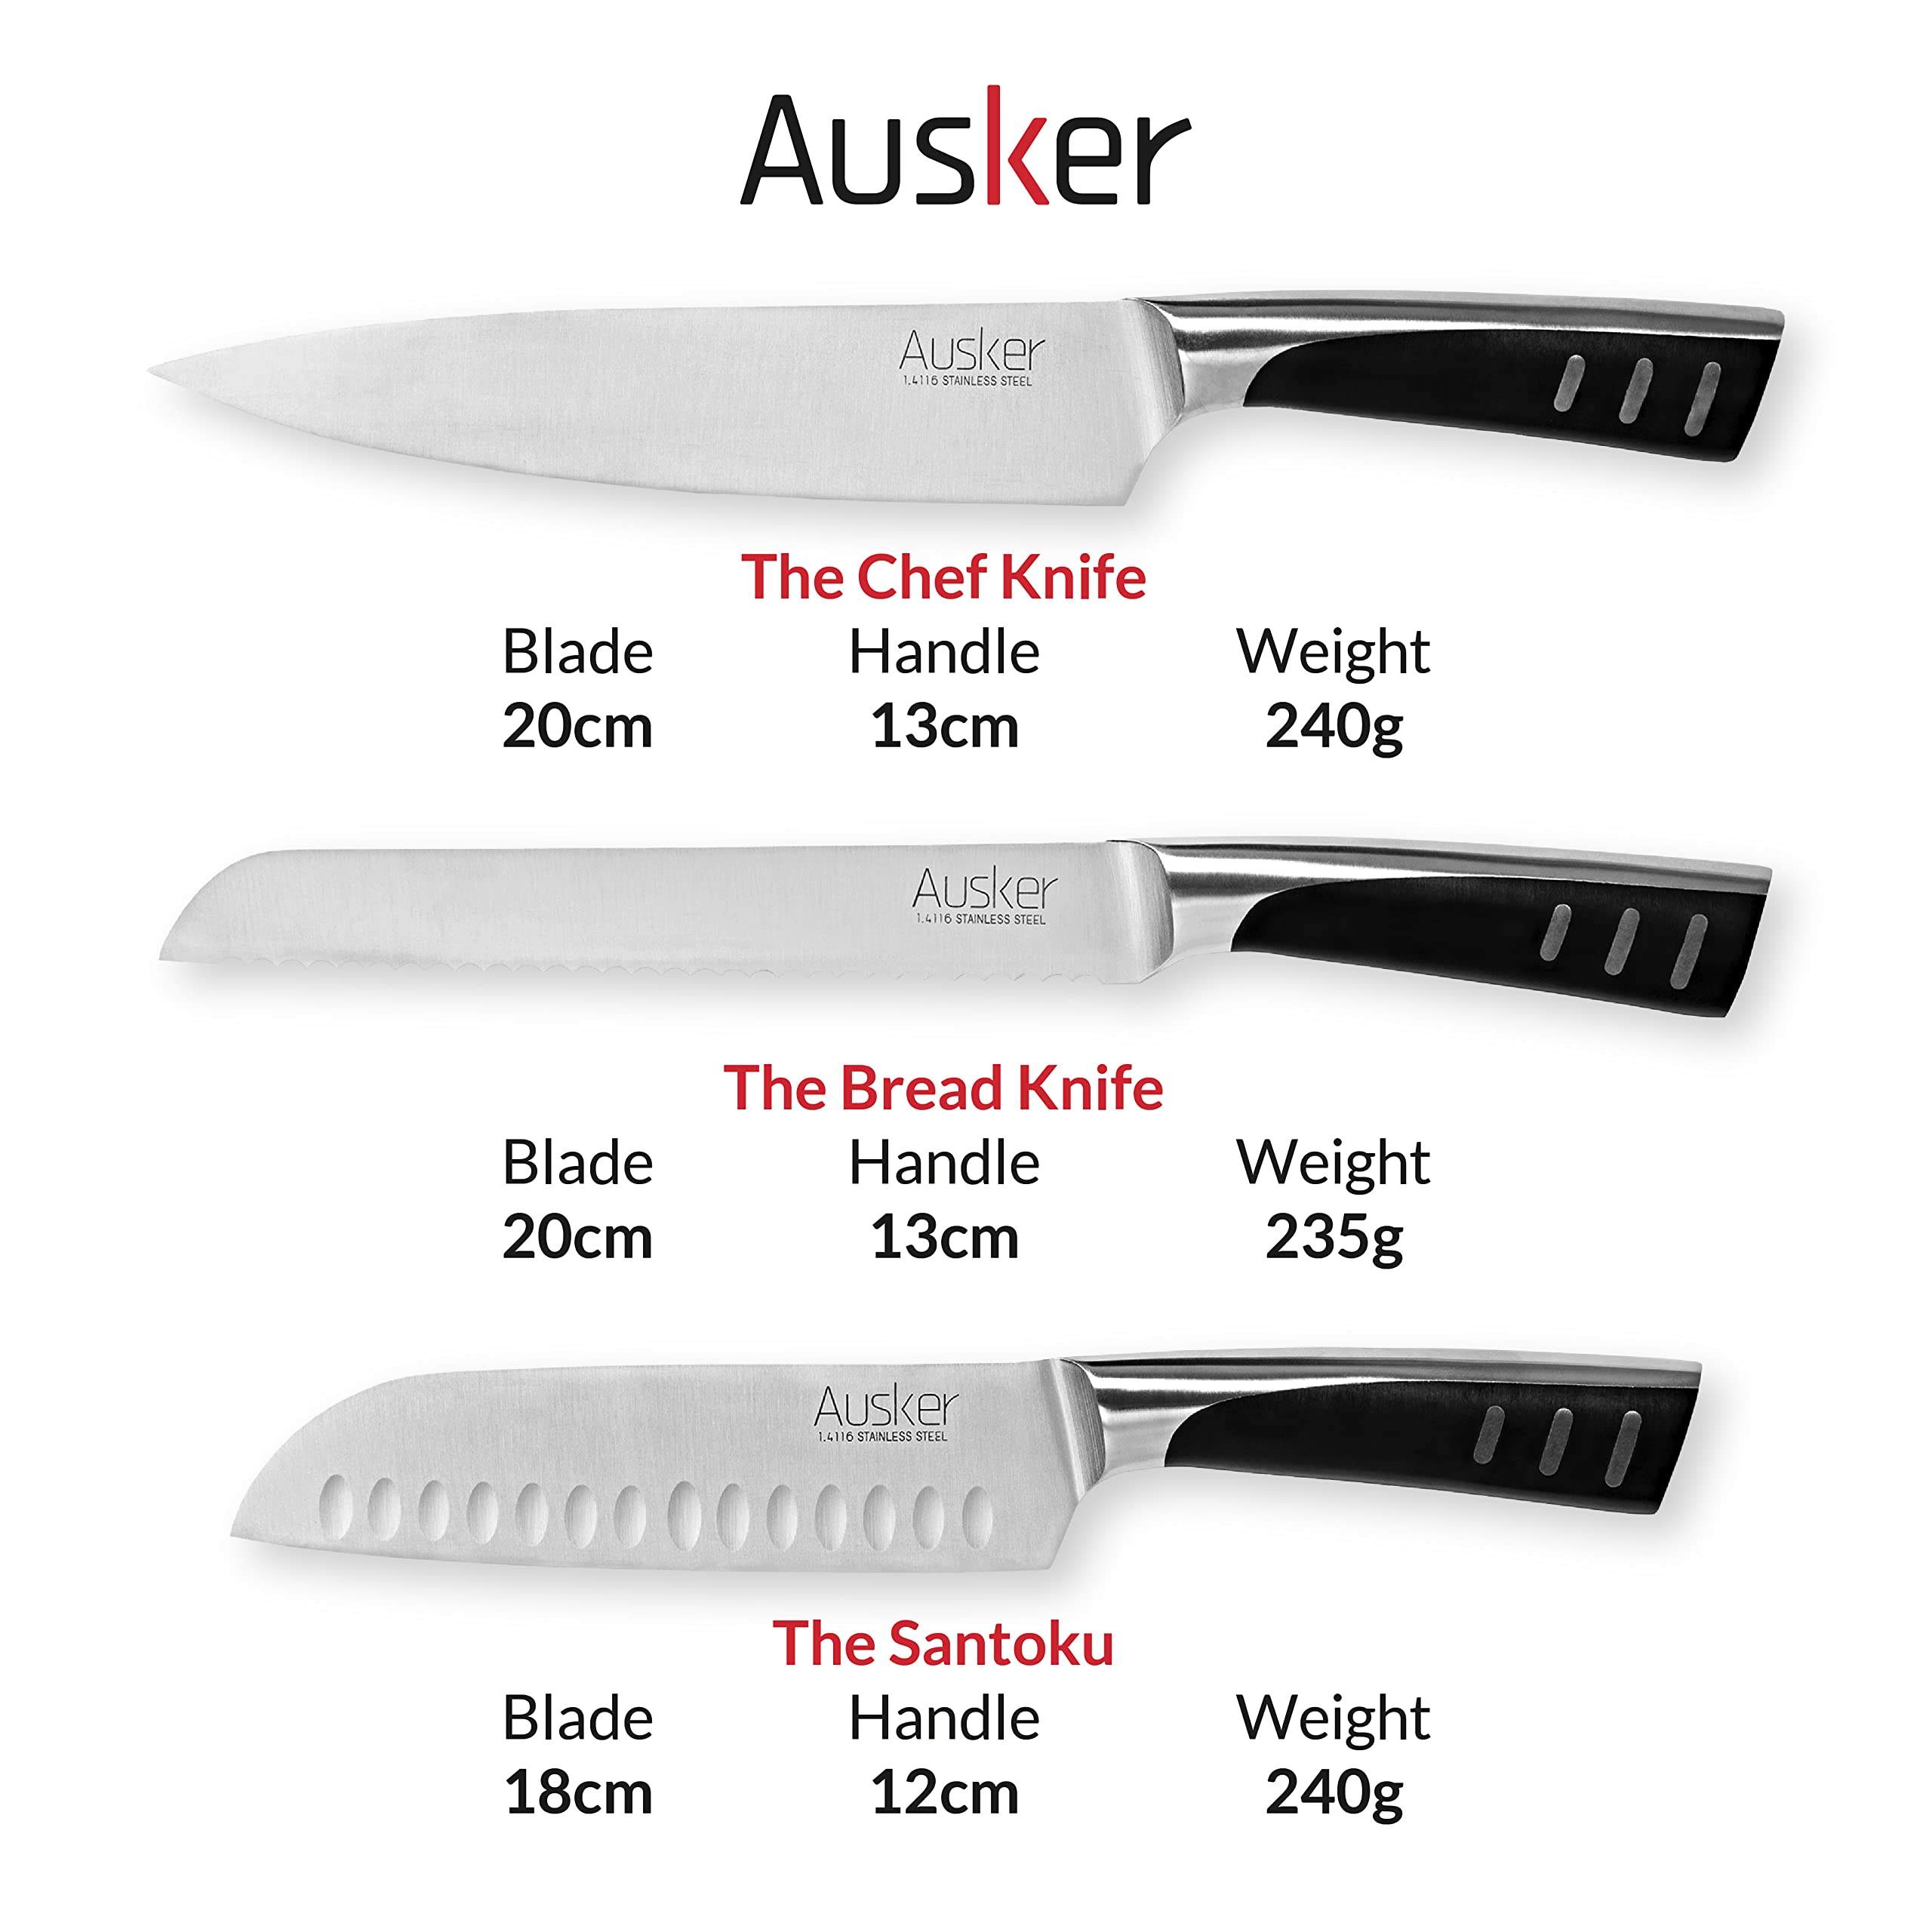 Ausker - Kitchen Knife Set Block with Sharpener, Chef, Santoku, Paring, Utility, Carving and Bread Knives, Stainless Steel Professional Kitchenware (Set of 6)